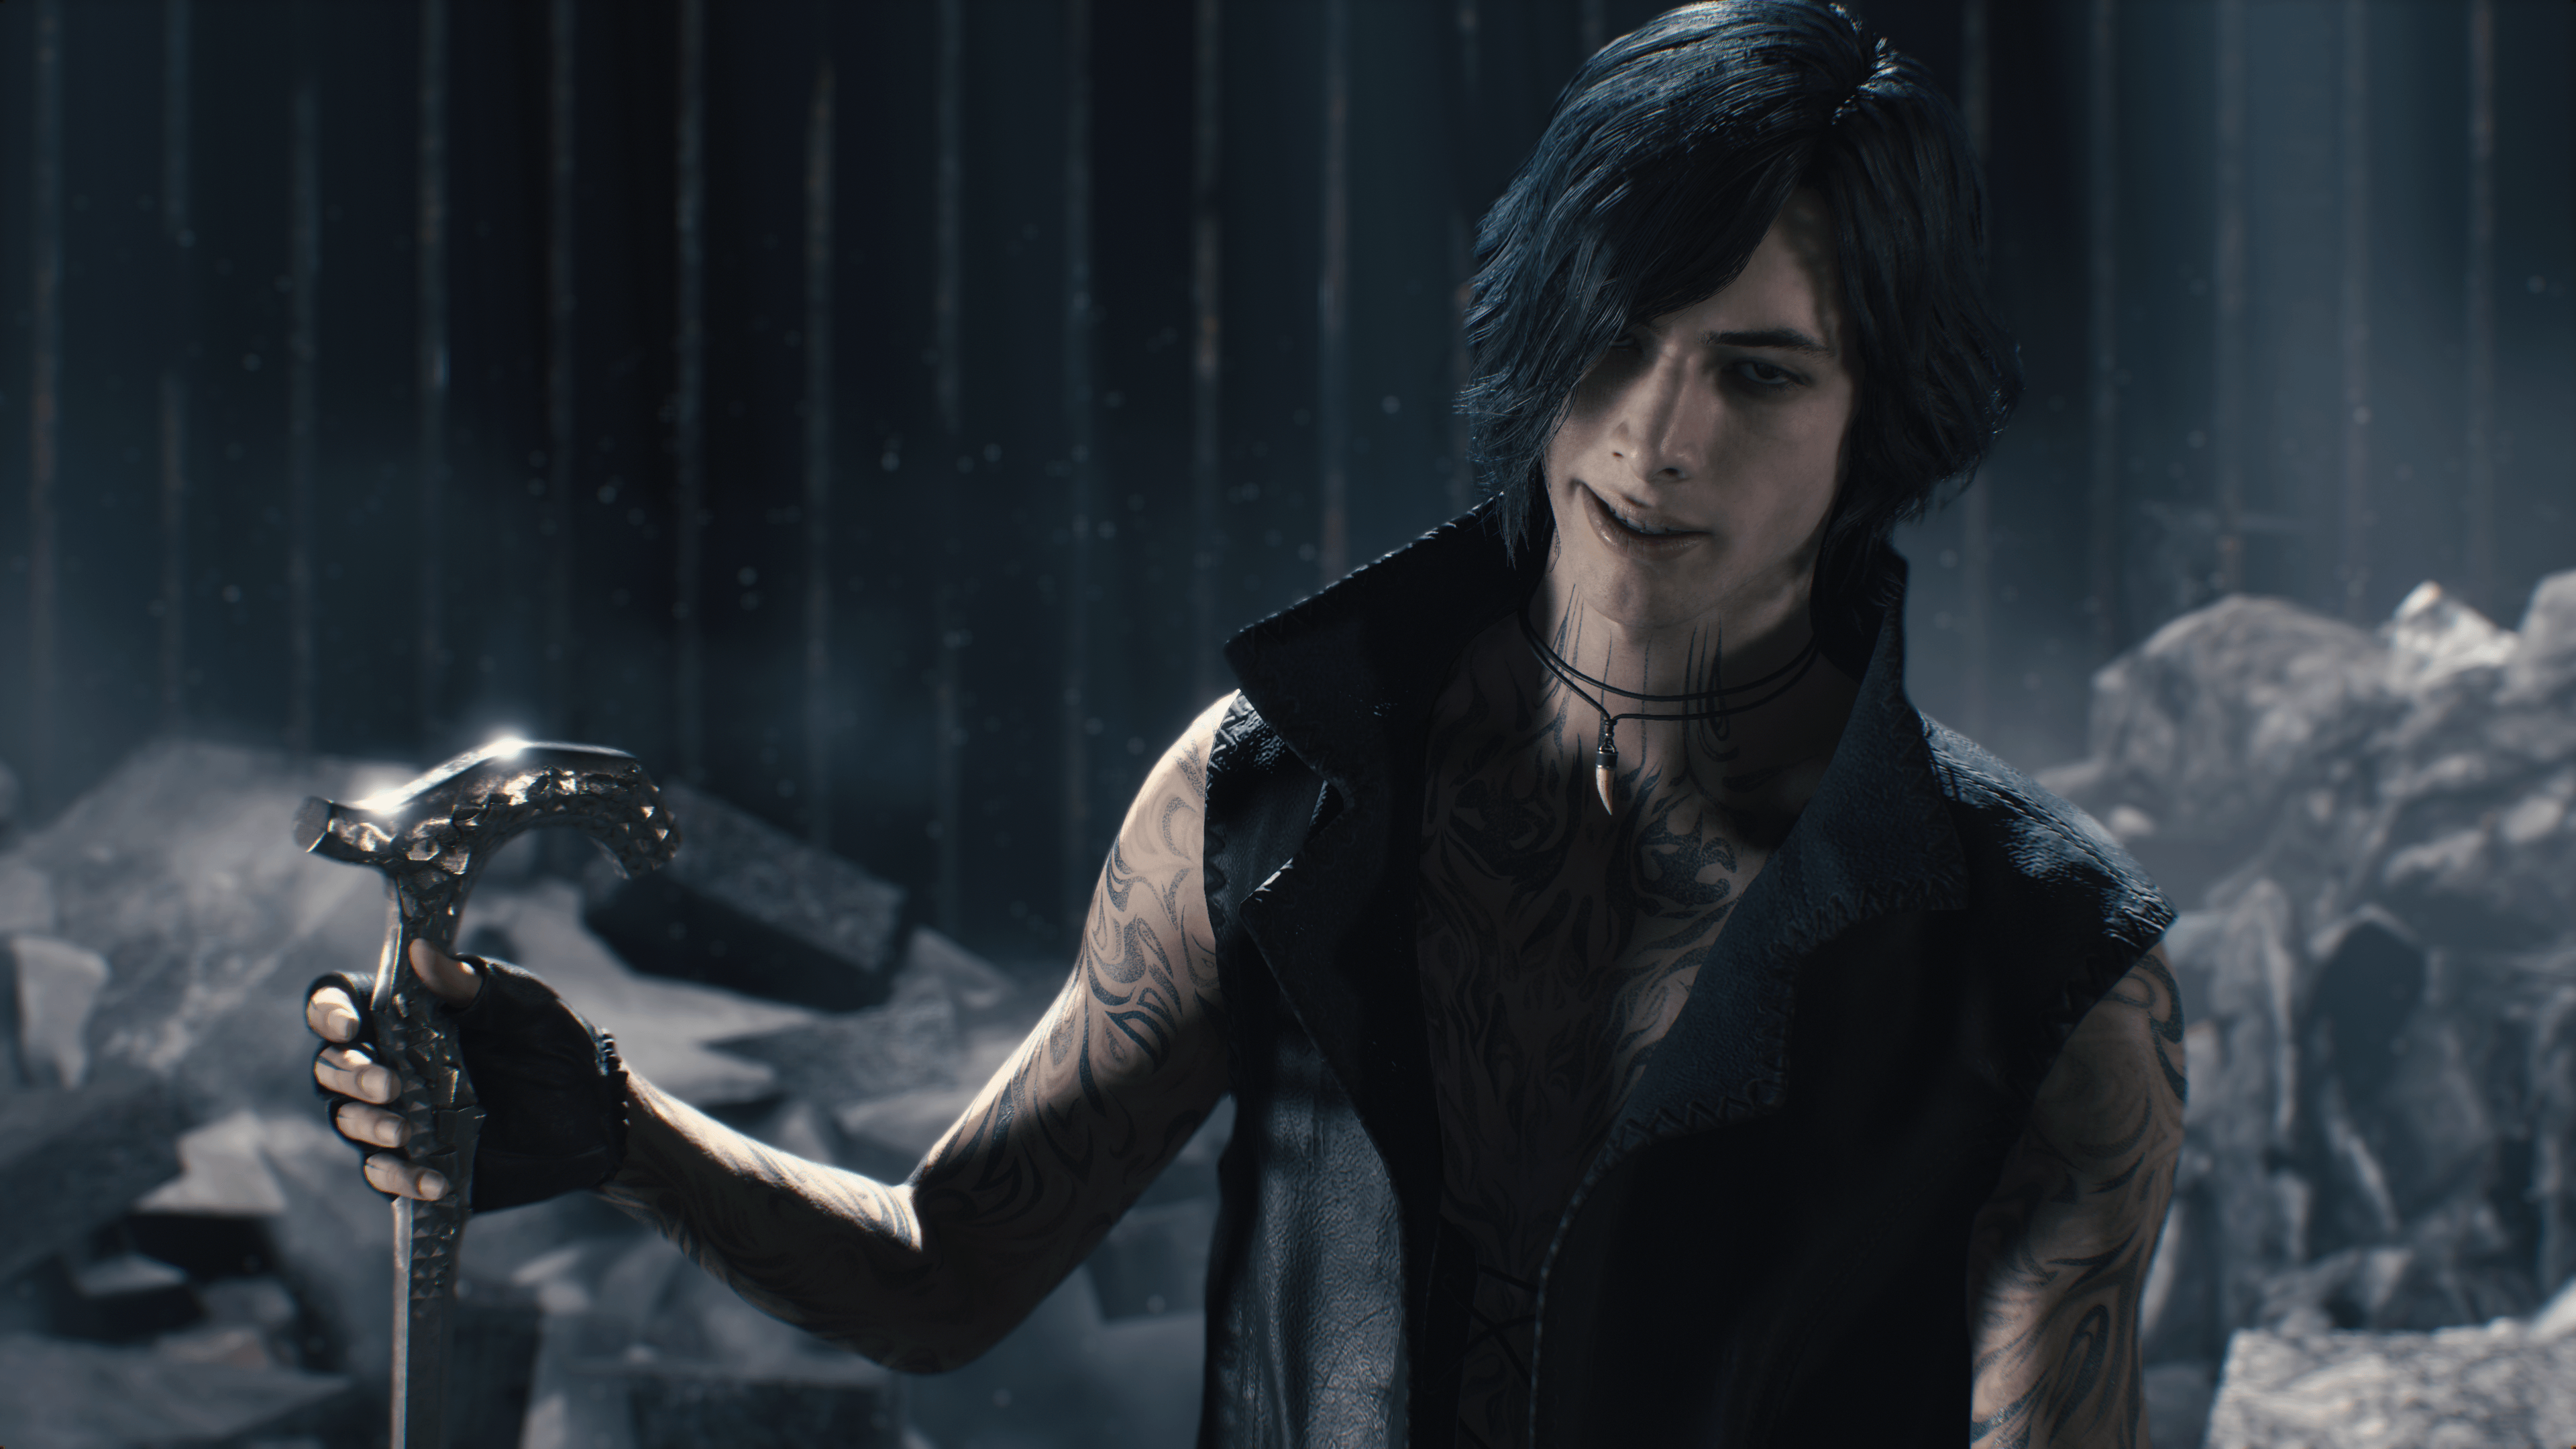 Devil May Cry 5 4k Ultra HD Wallpaper. Background Image